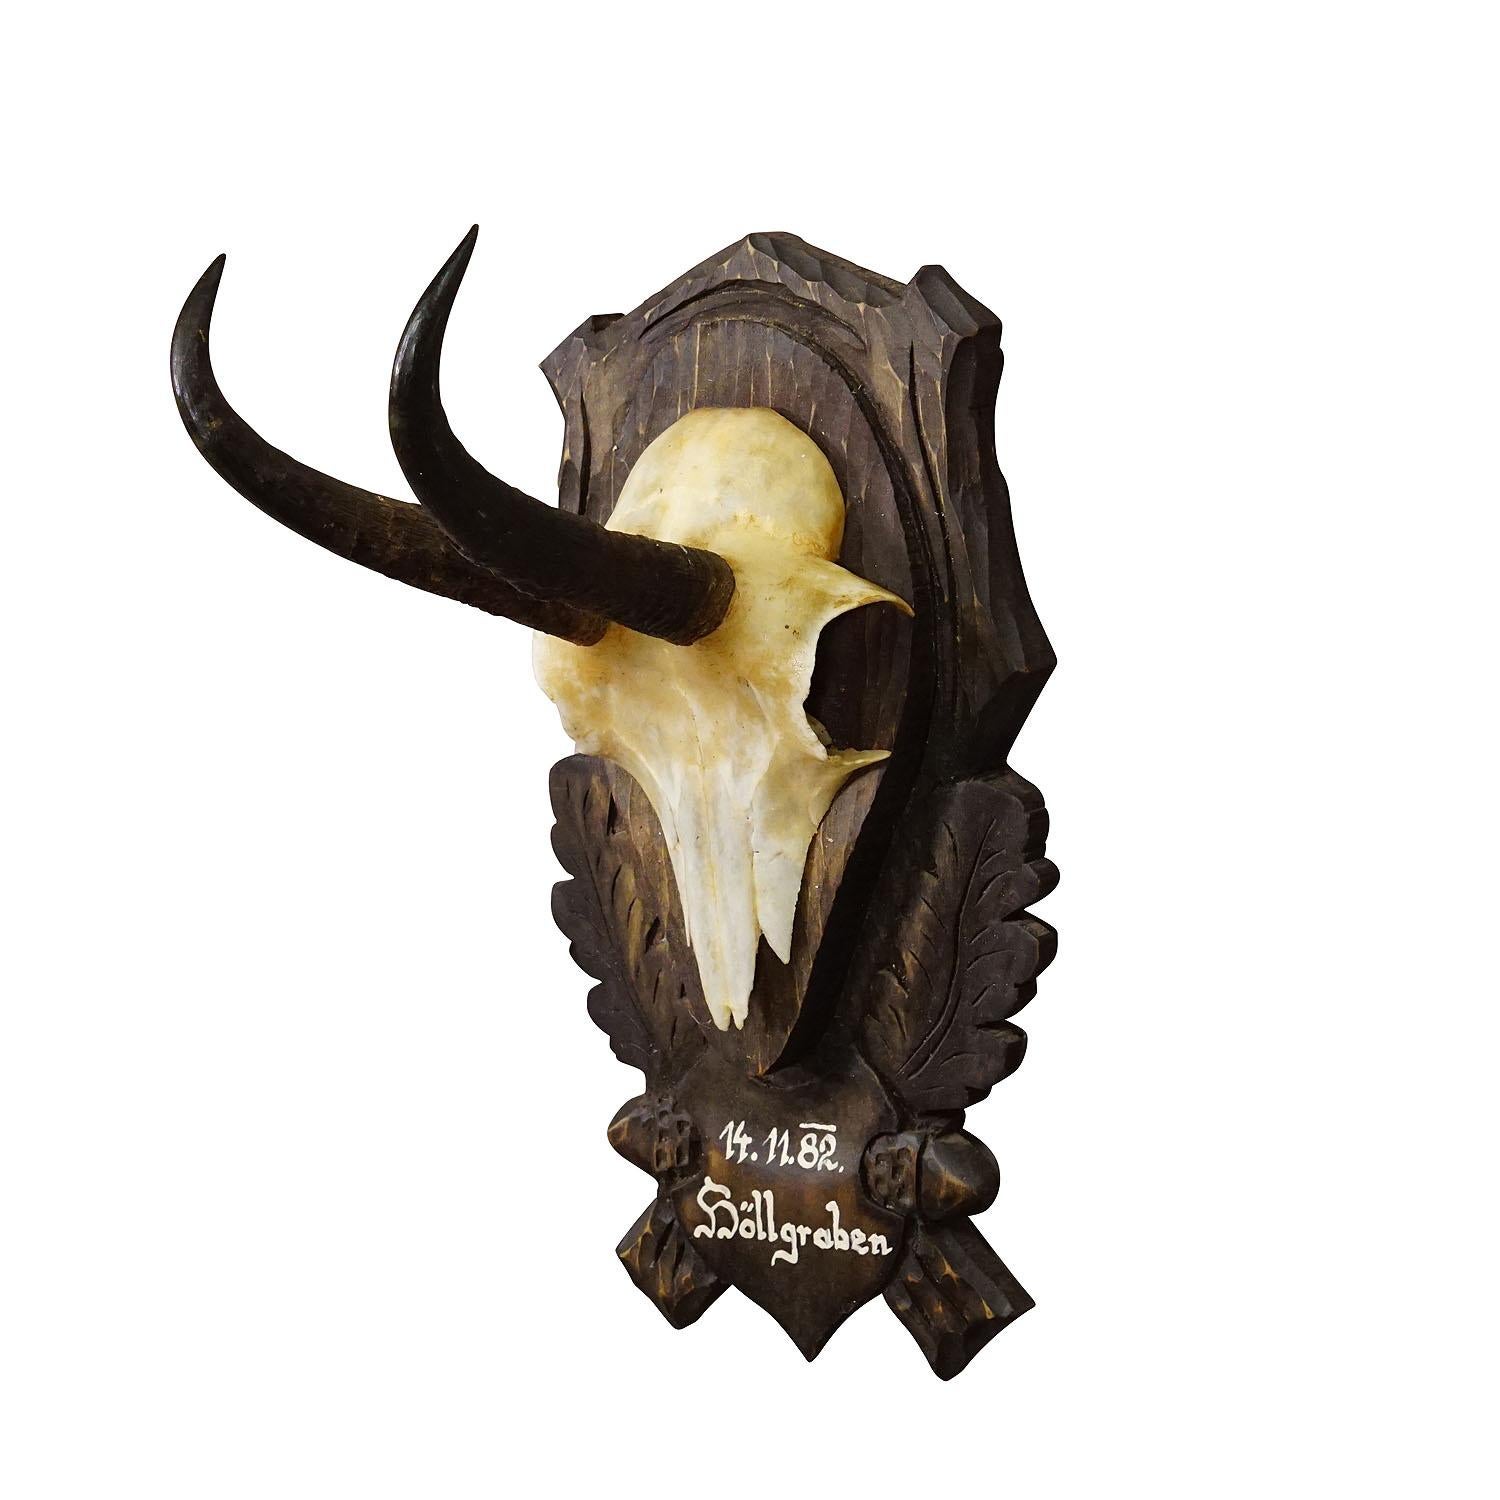 Vintage Black Forest Chamois Trophy on Carved Plaque

A vintage chamois (Rupicapra rupicapra) trophy mounted on a wooden carved plaque. The plaque features a handpainted inscription and a paper lable with all data of the hunt on the back. The trophy